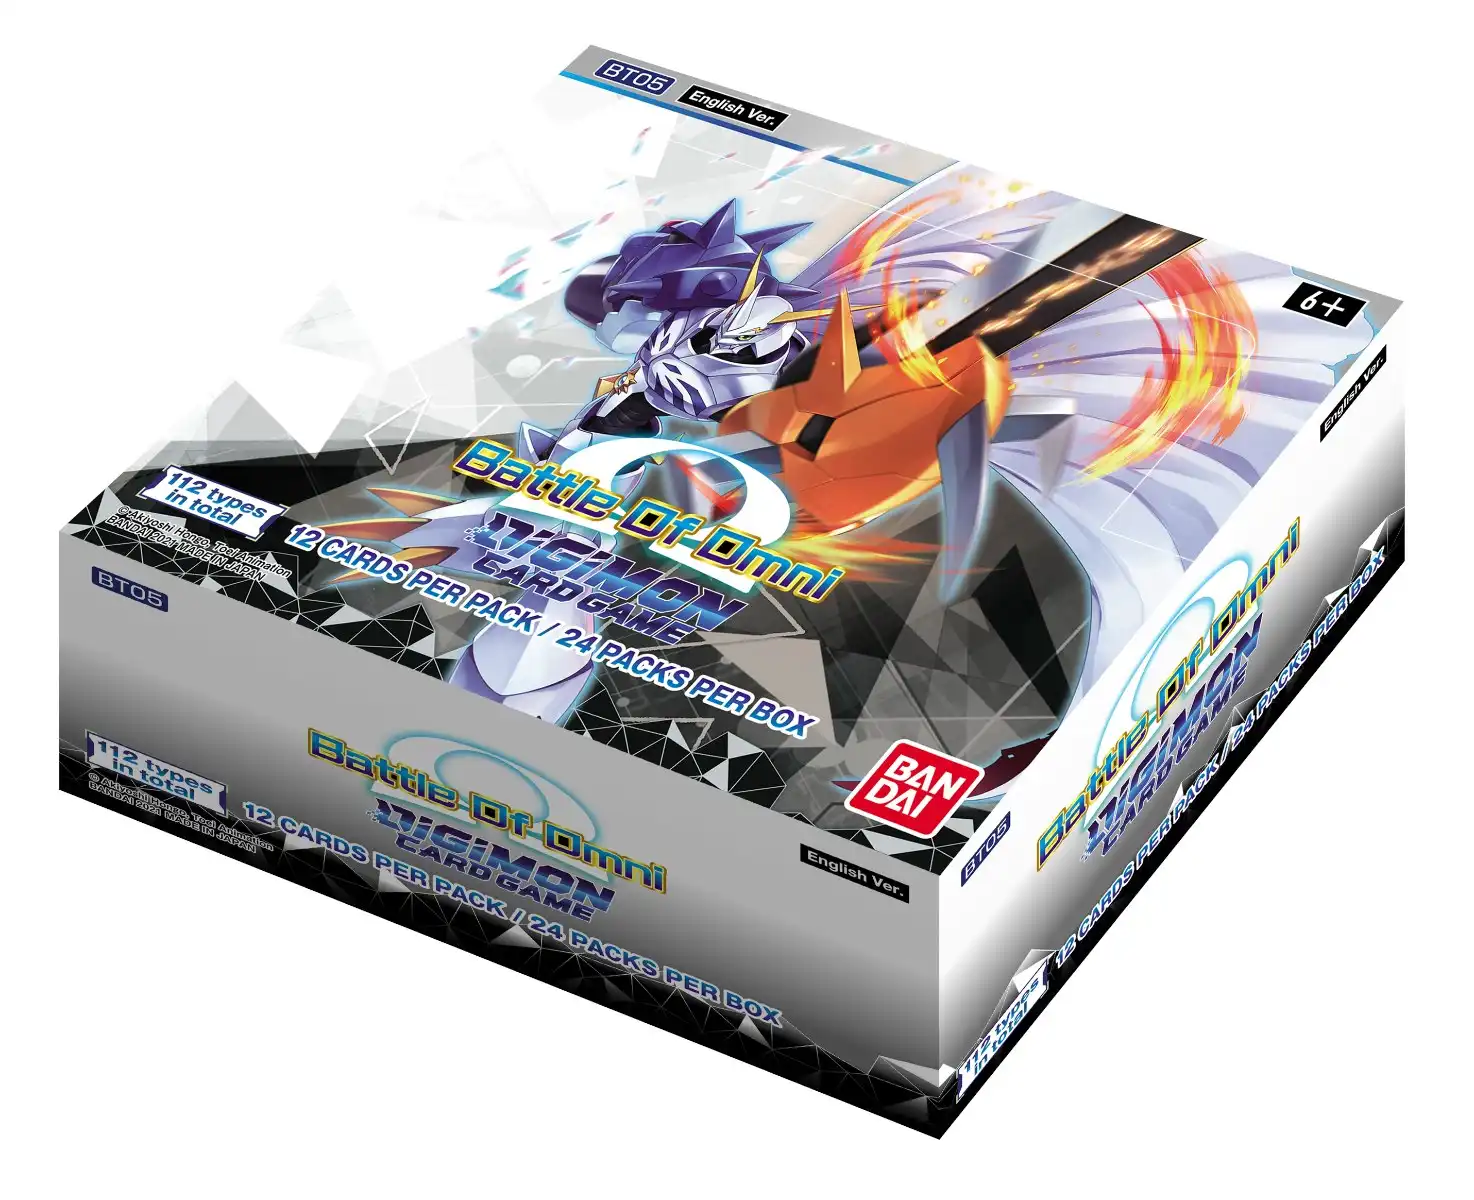 Digimon Card Game Series 05 Battle of Omni BT05 Booster Display